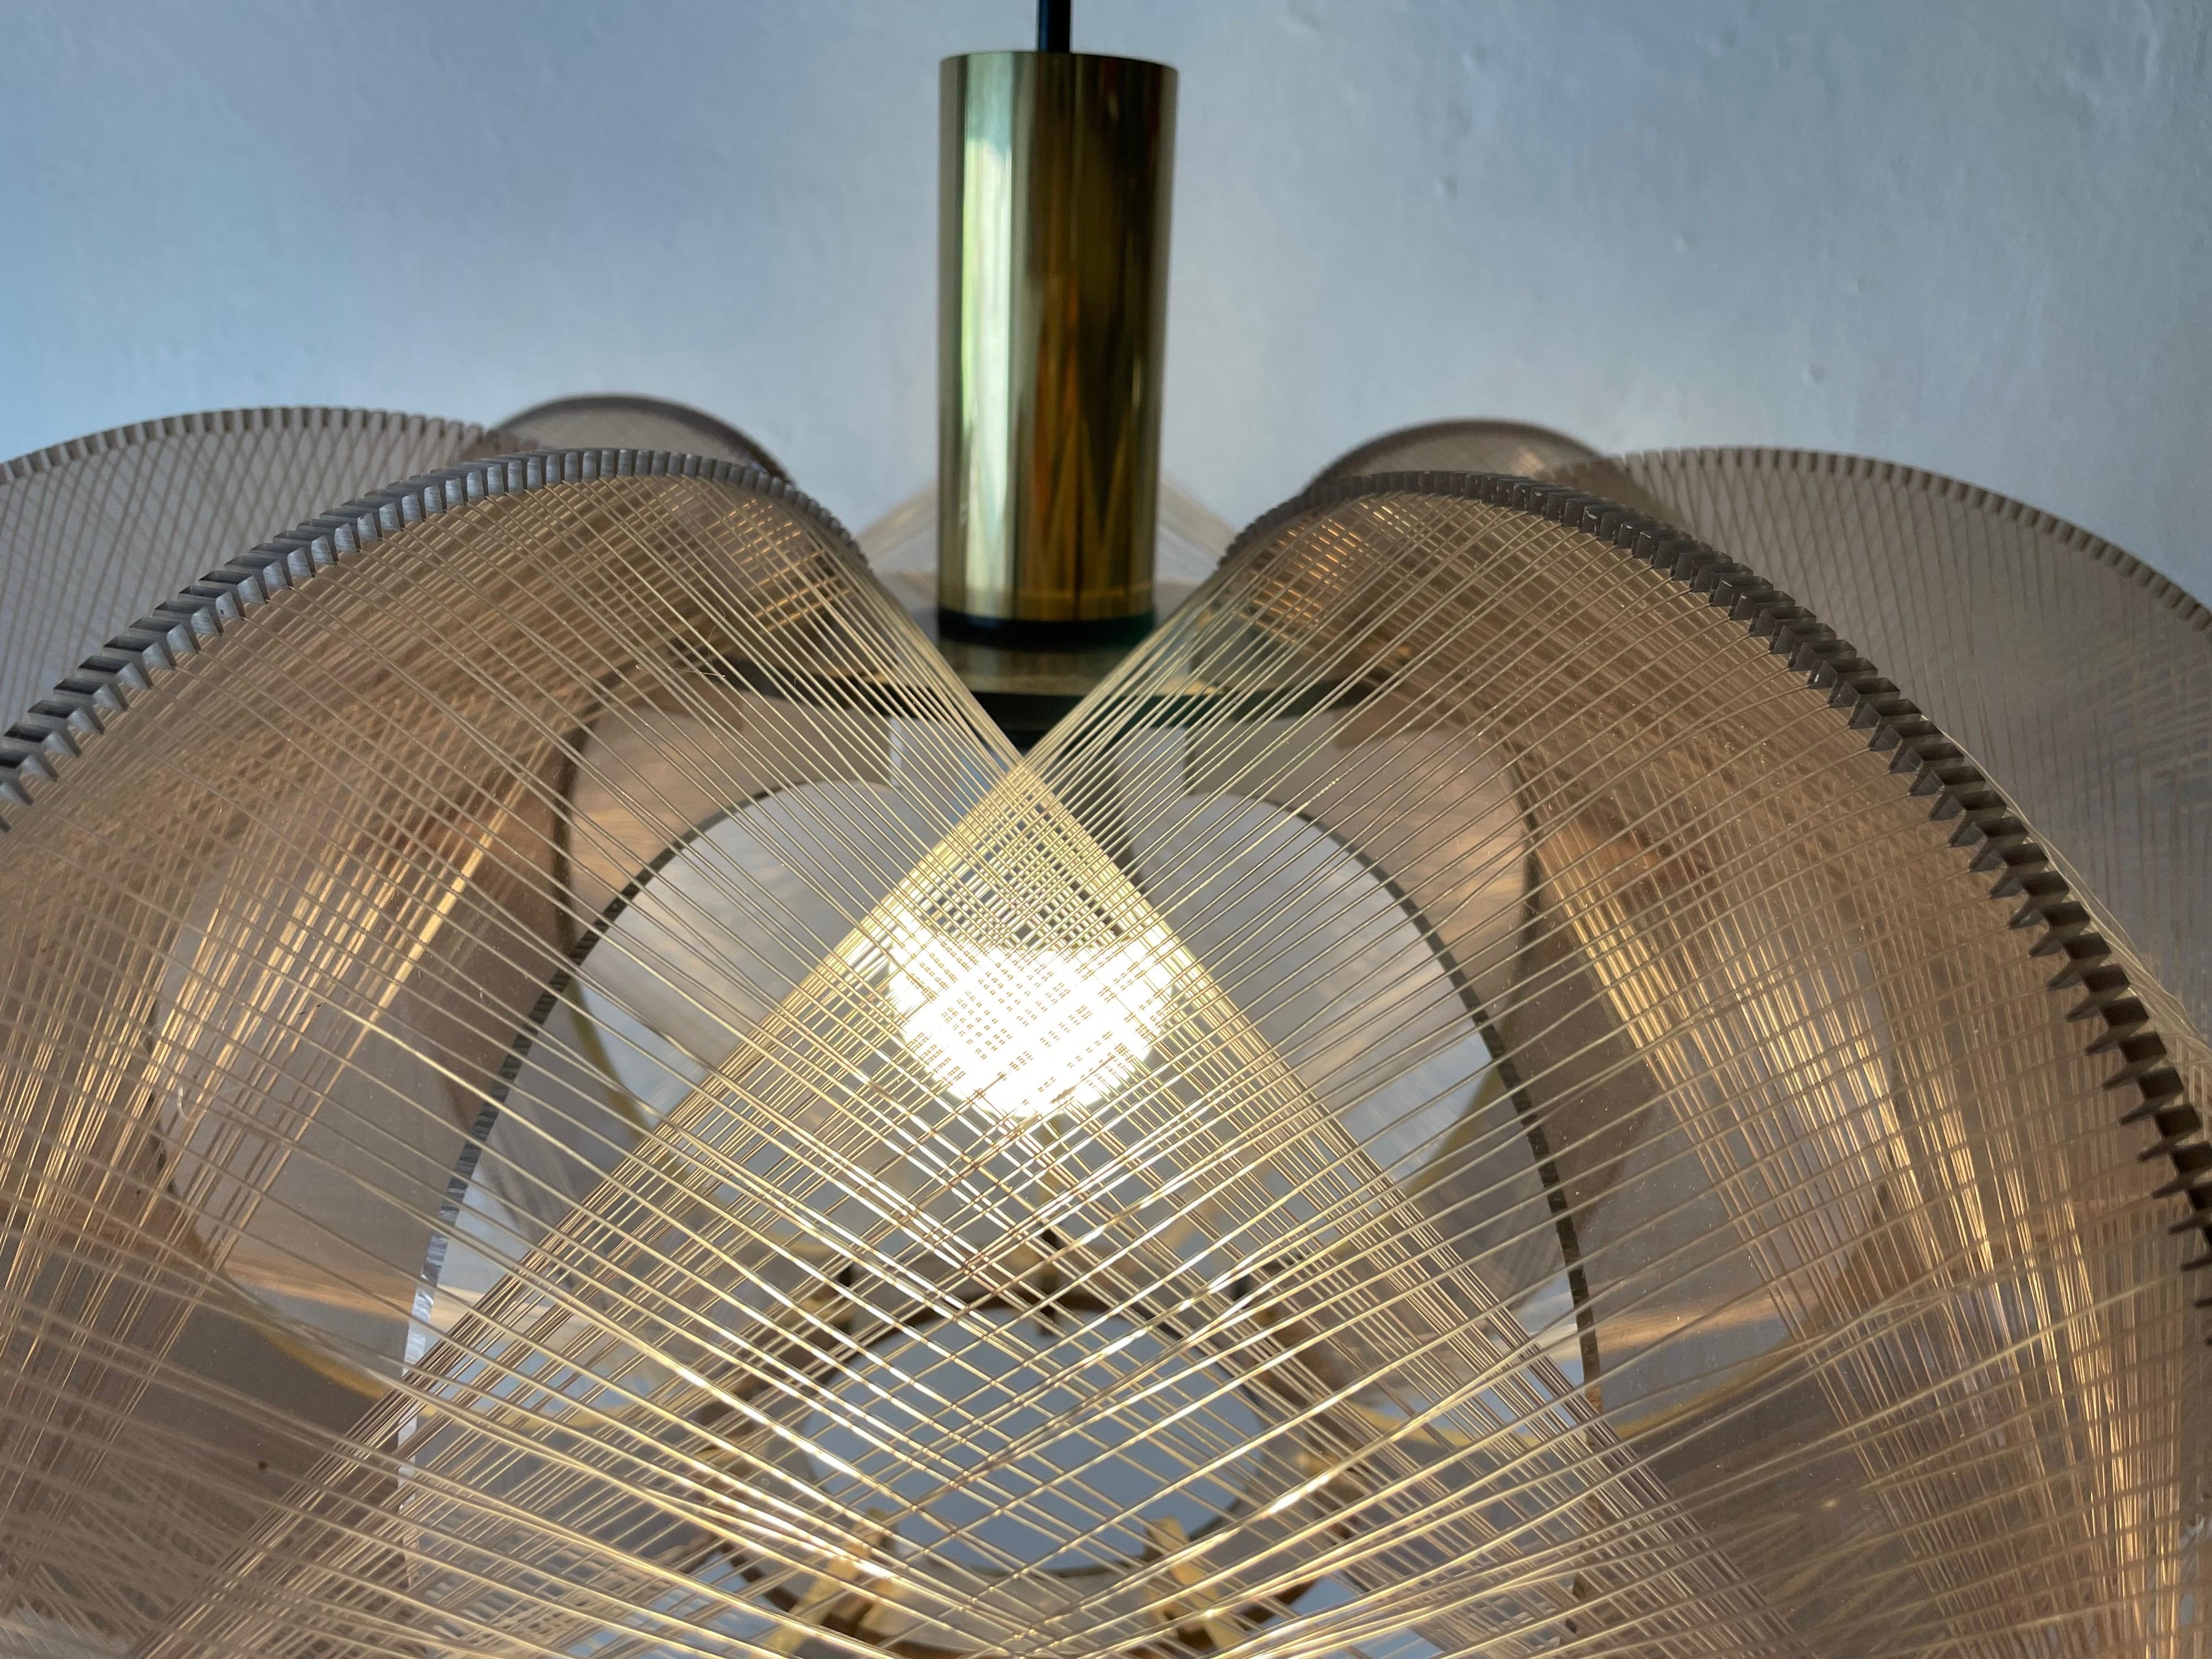 Plexiglass & Wired Pendant Lamp by Paul Secon for Sompex, 1970s, Germany 5